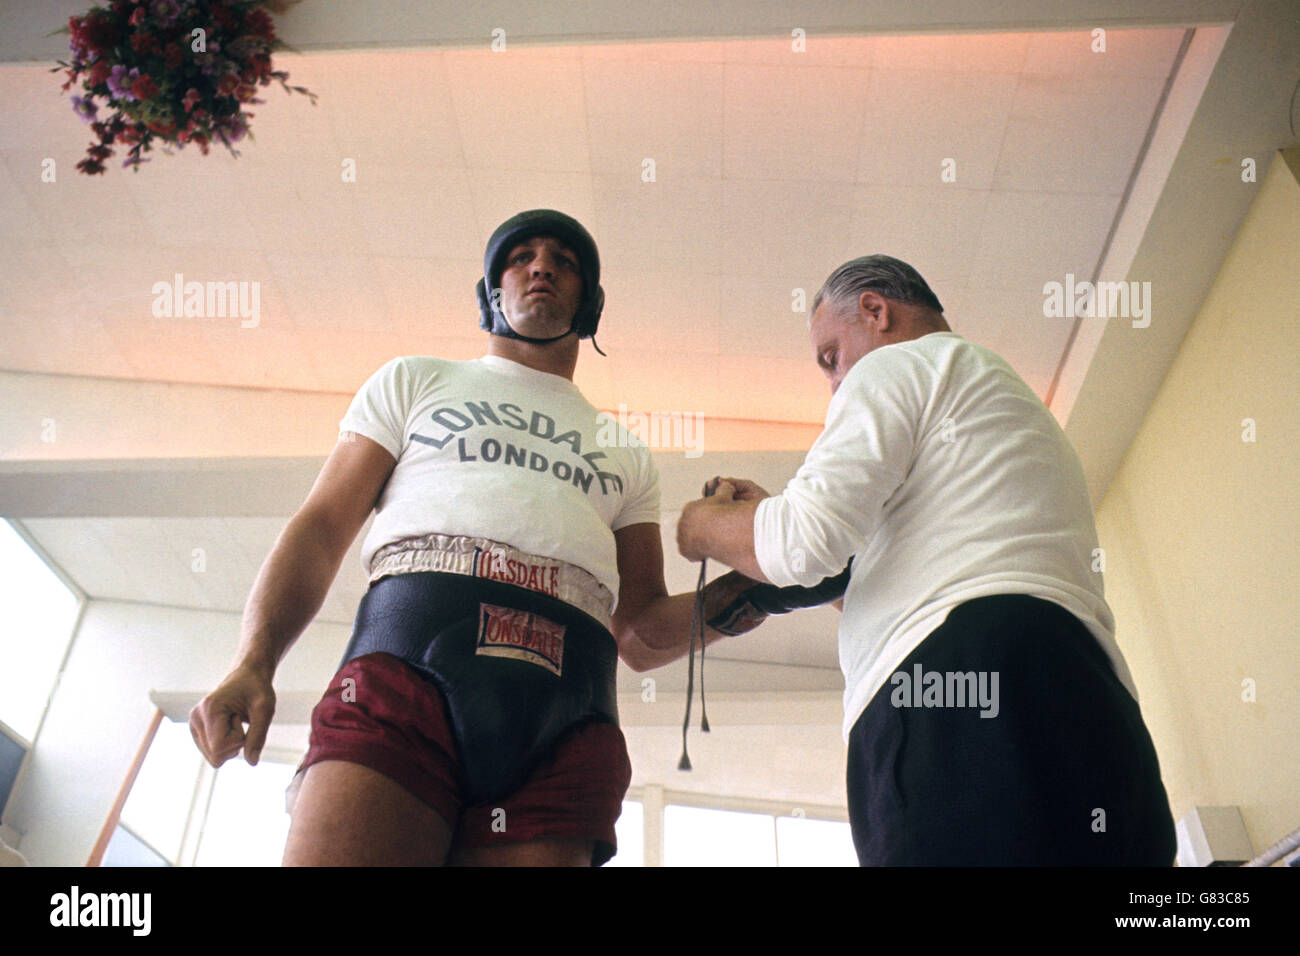 Boxing - World Heavyweight Title - Muhammad Ali v Brian London - Brian London Training - Pontins, Blackpool. Brian London adjusts his gloves before stepping into the ring for a sparring session in his home town of Blackpool. Stock Photo